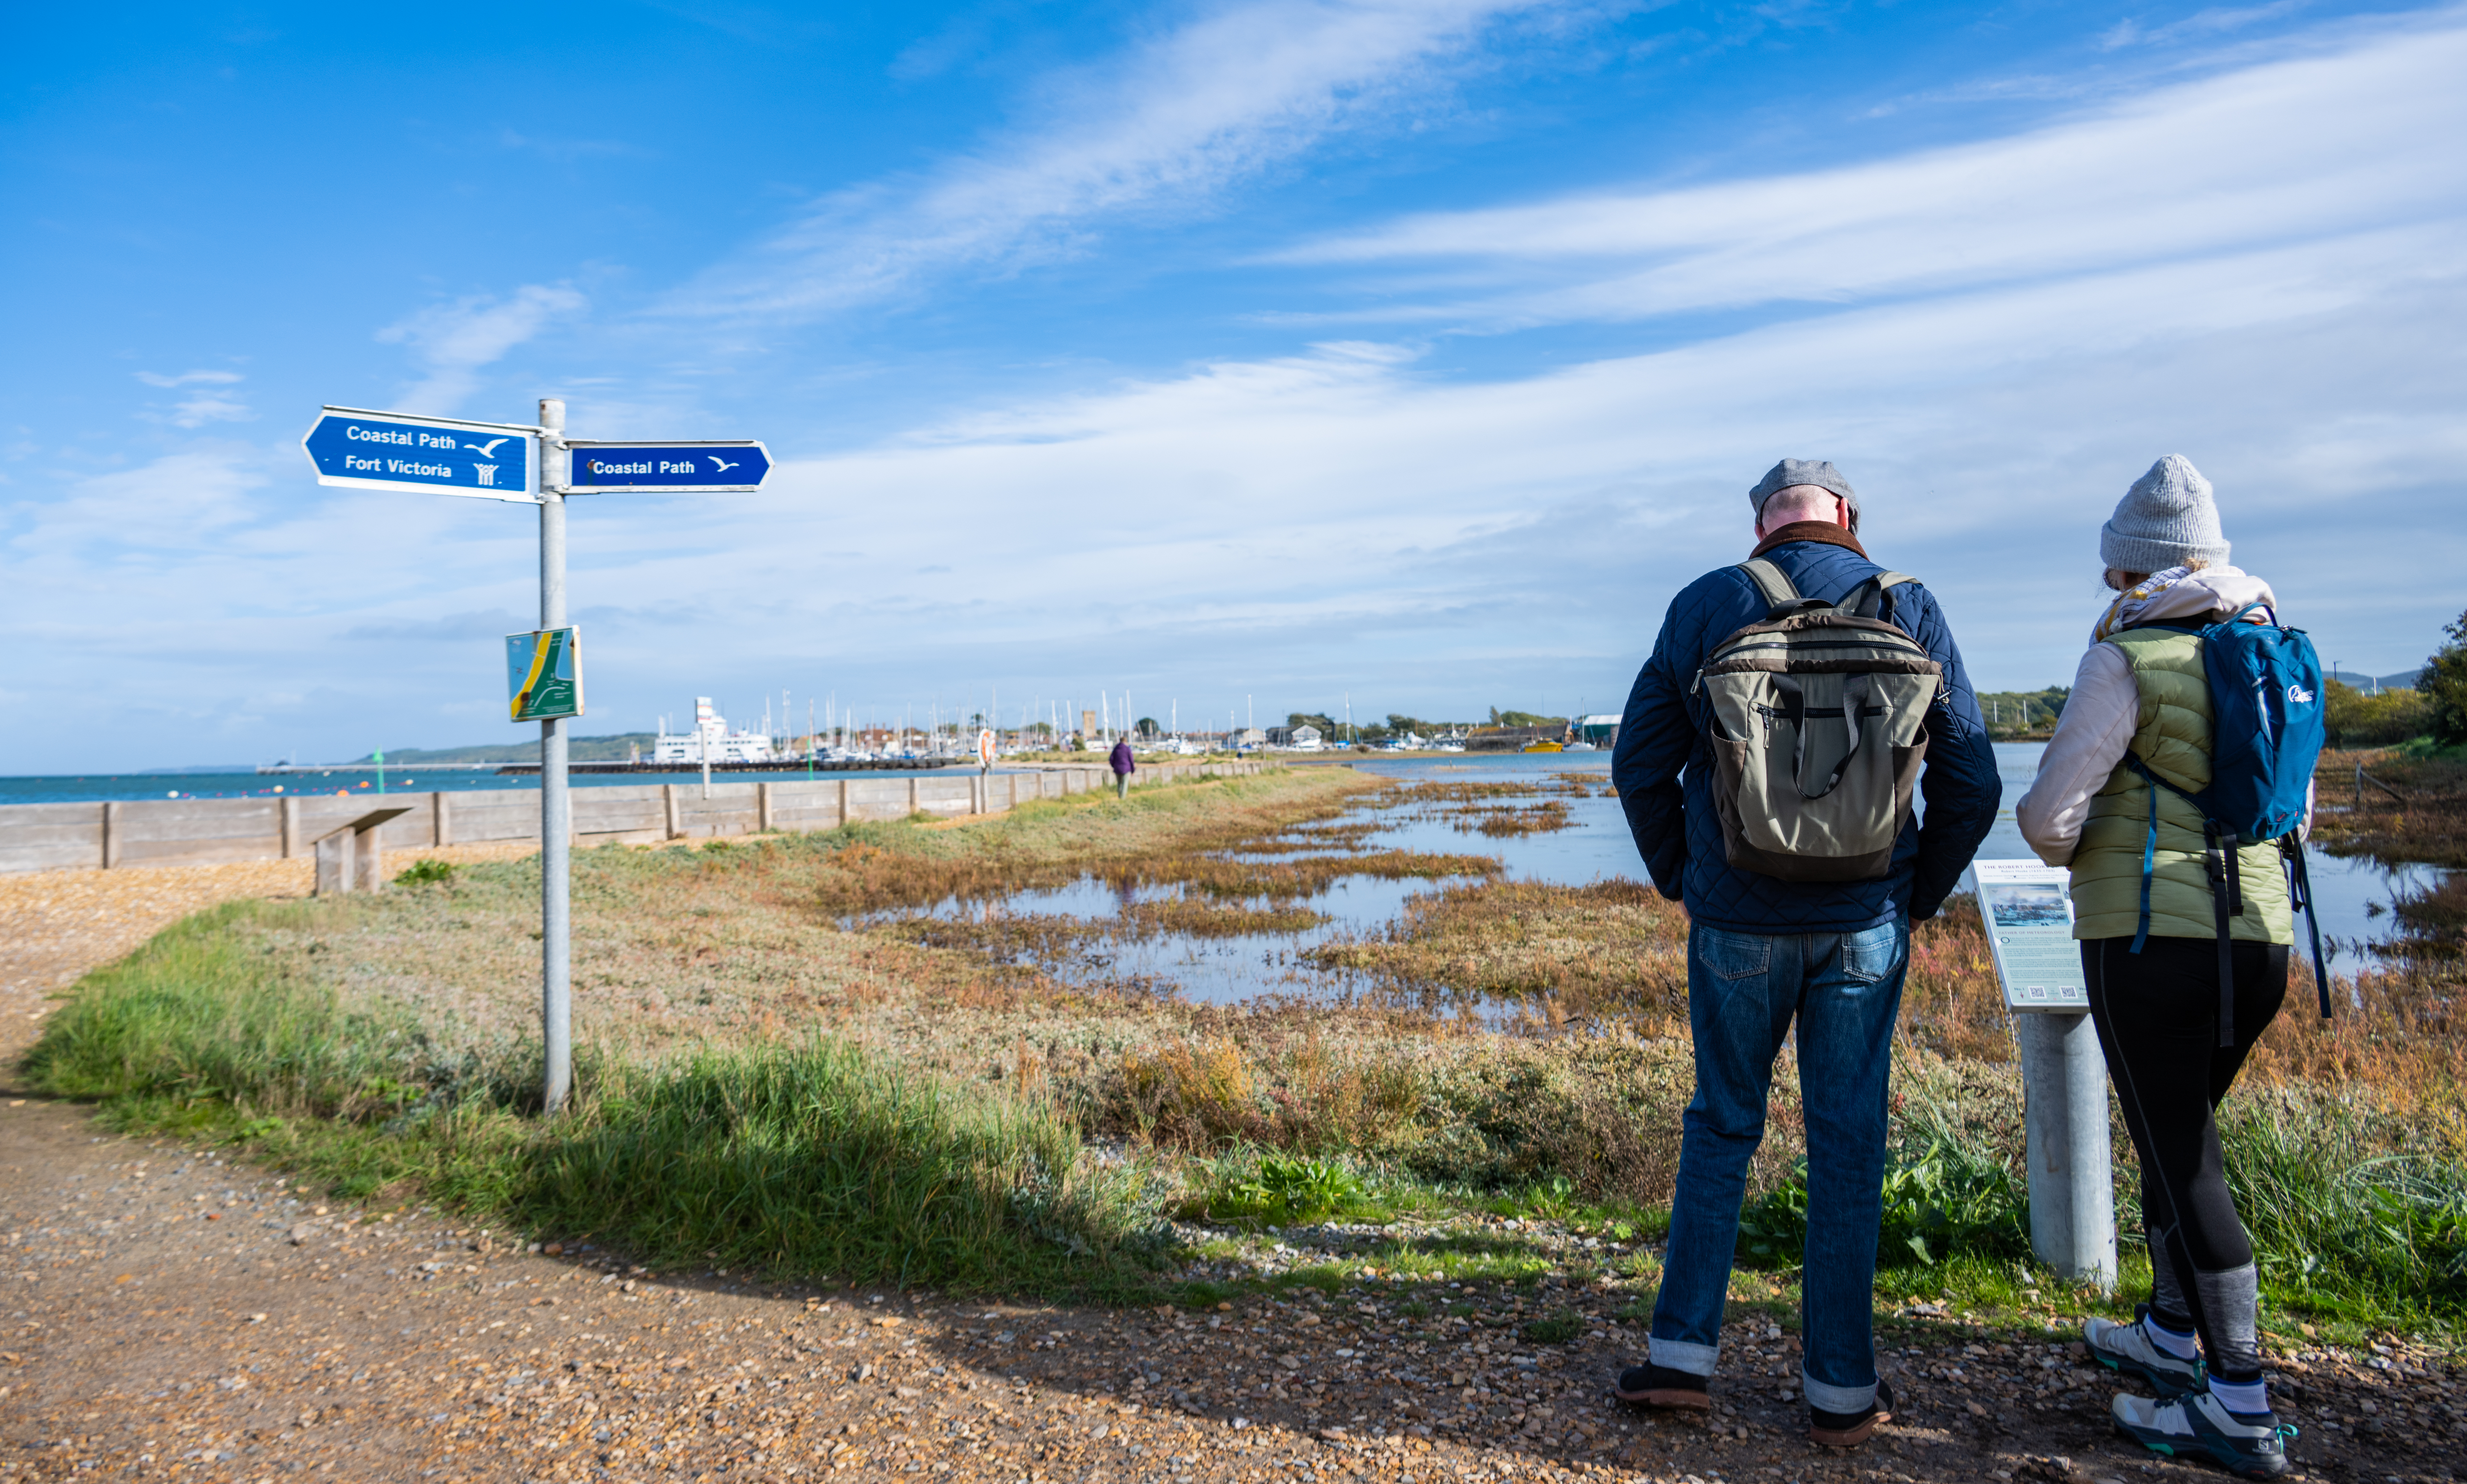 Photograph of a middle aged white man and woman looking at an interpretation board near a signpost on the Isle of Wight coastal path.